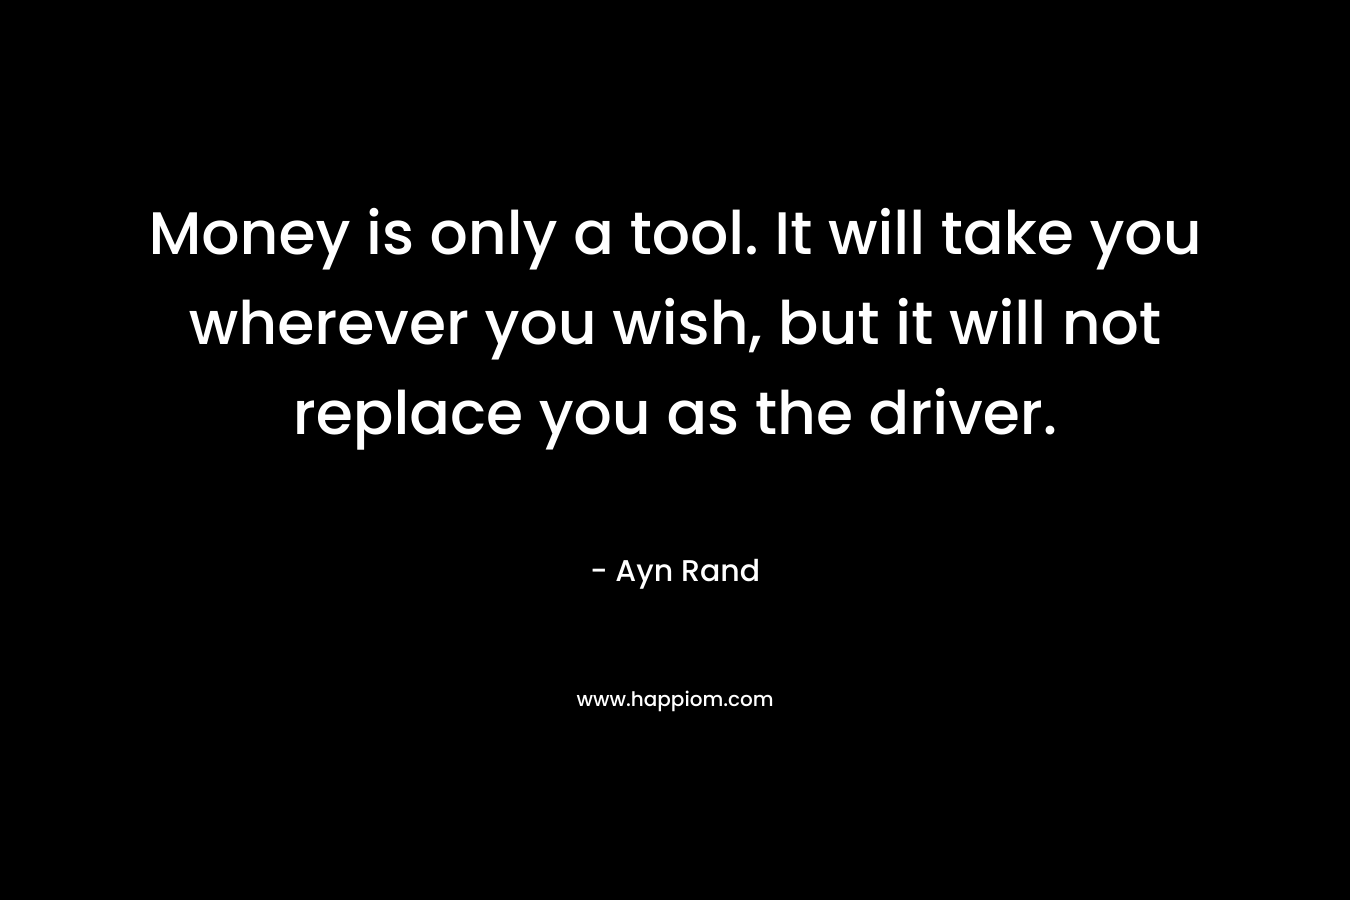 Money is only a tool. It will take you wherever you wish, but it will not replace you as the driver. – Ayn Rand